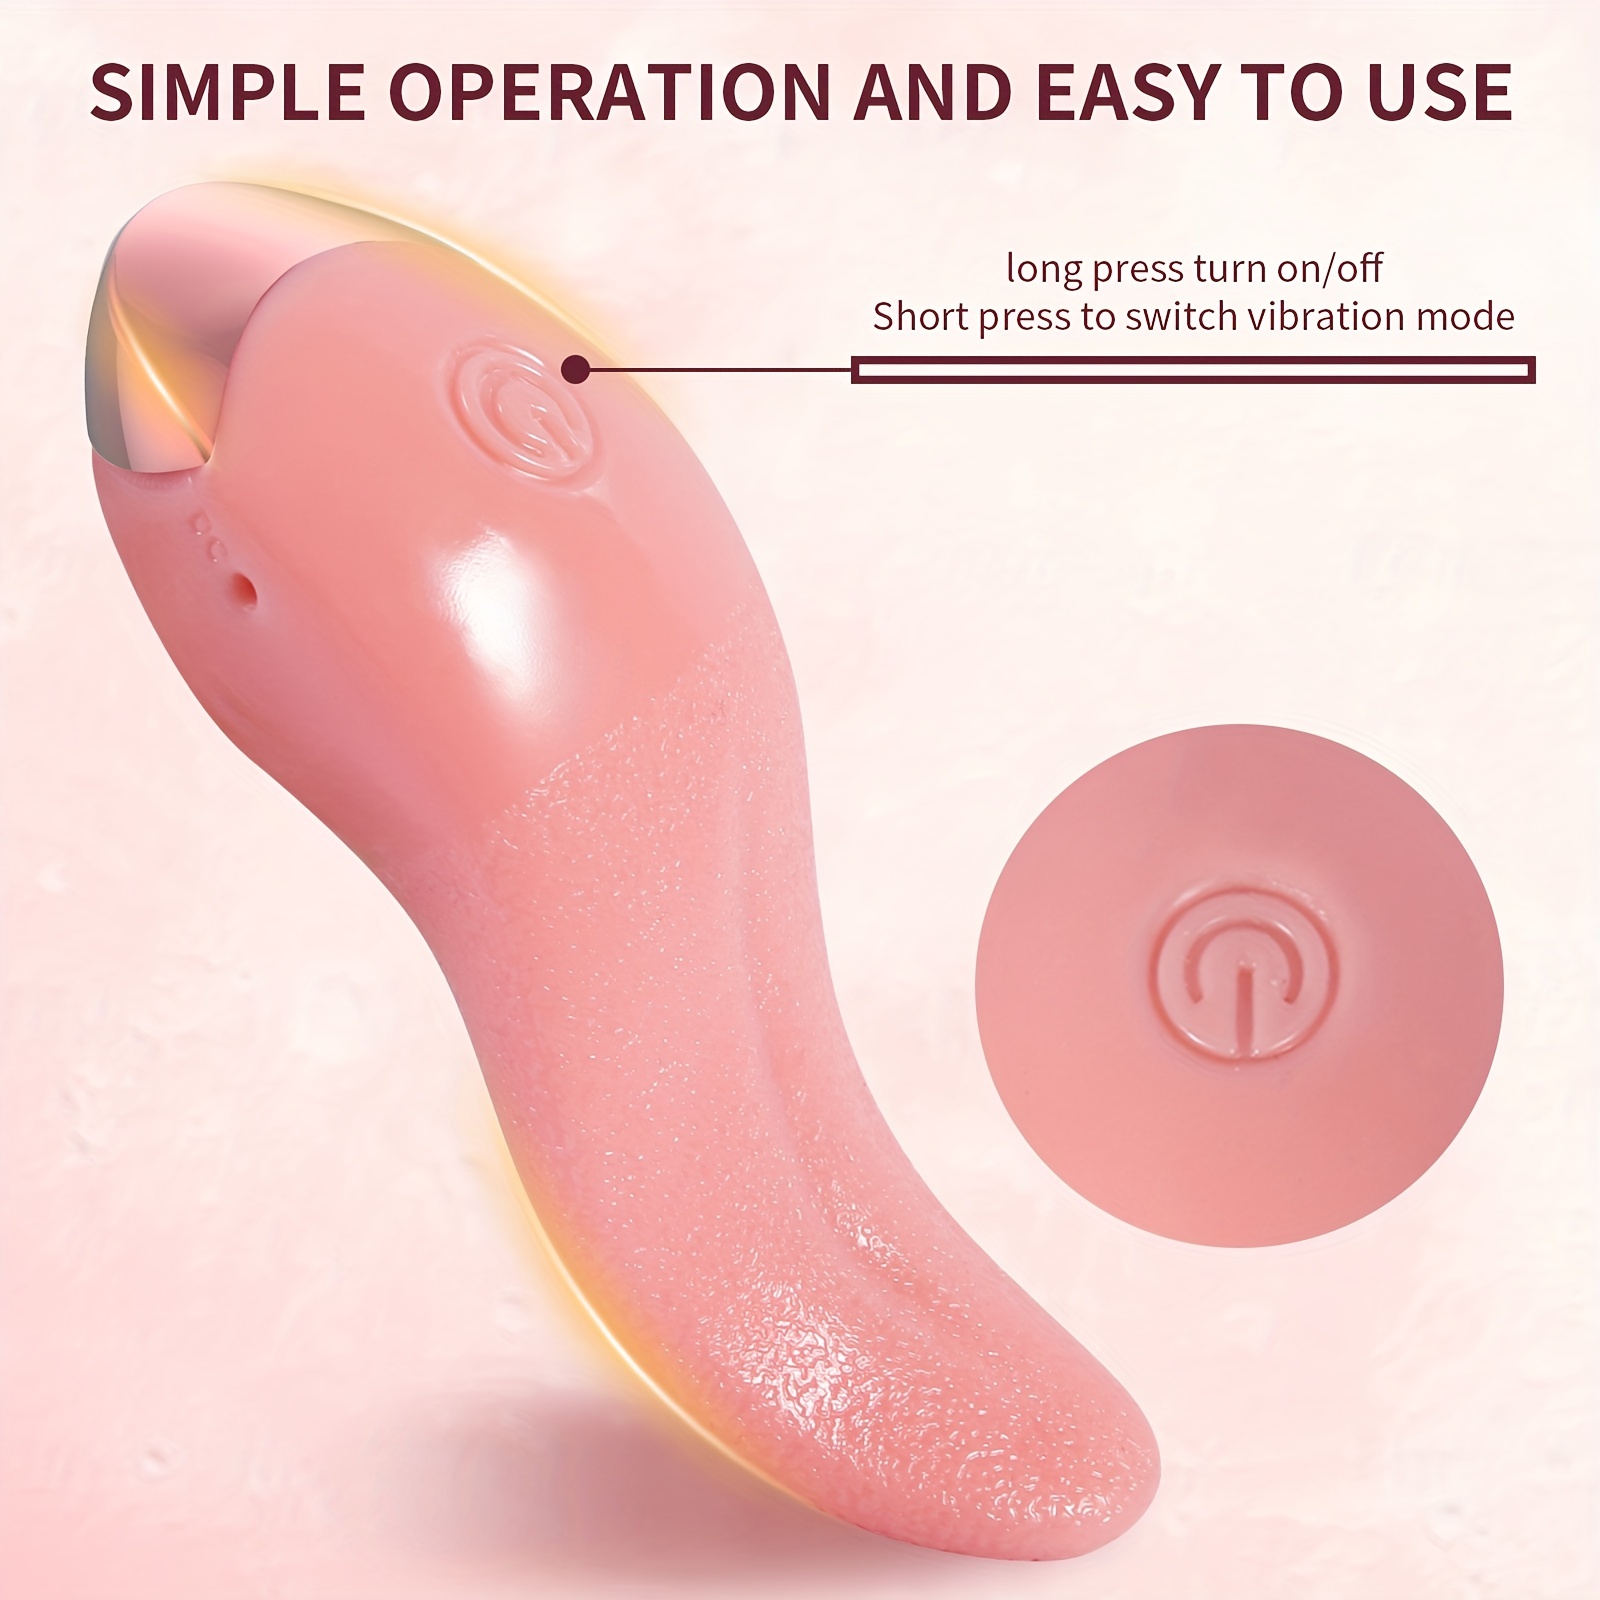 Fully Automatic Simulated Tongue Vibrator For Women, Adult Sex Toys picture